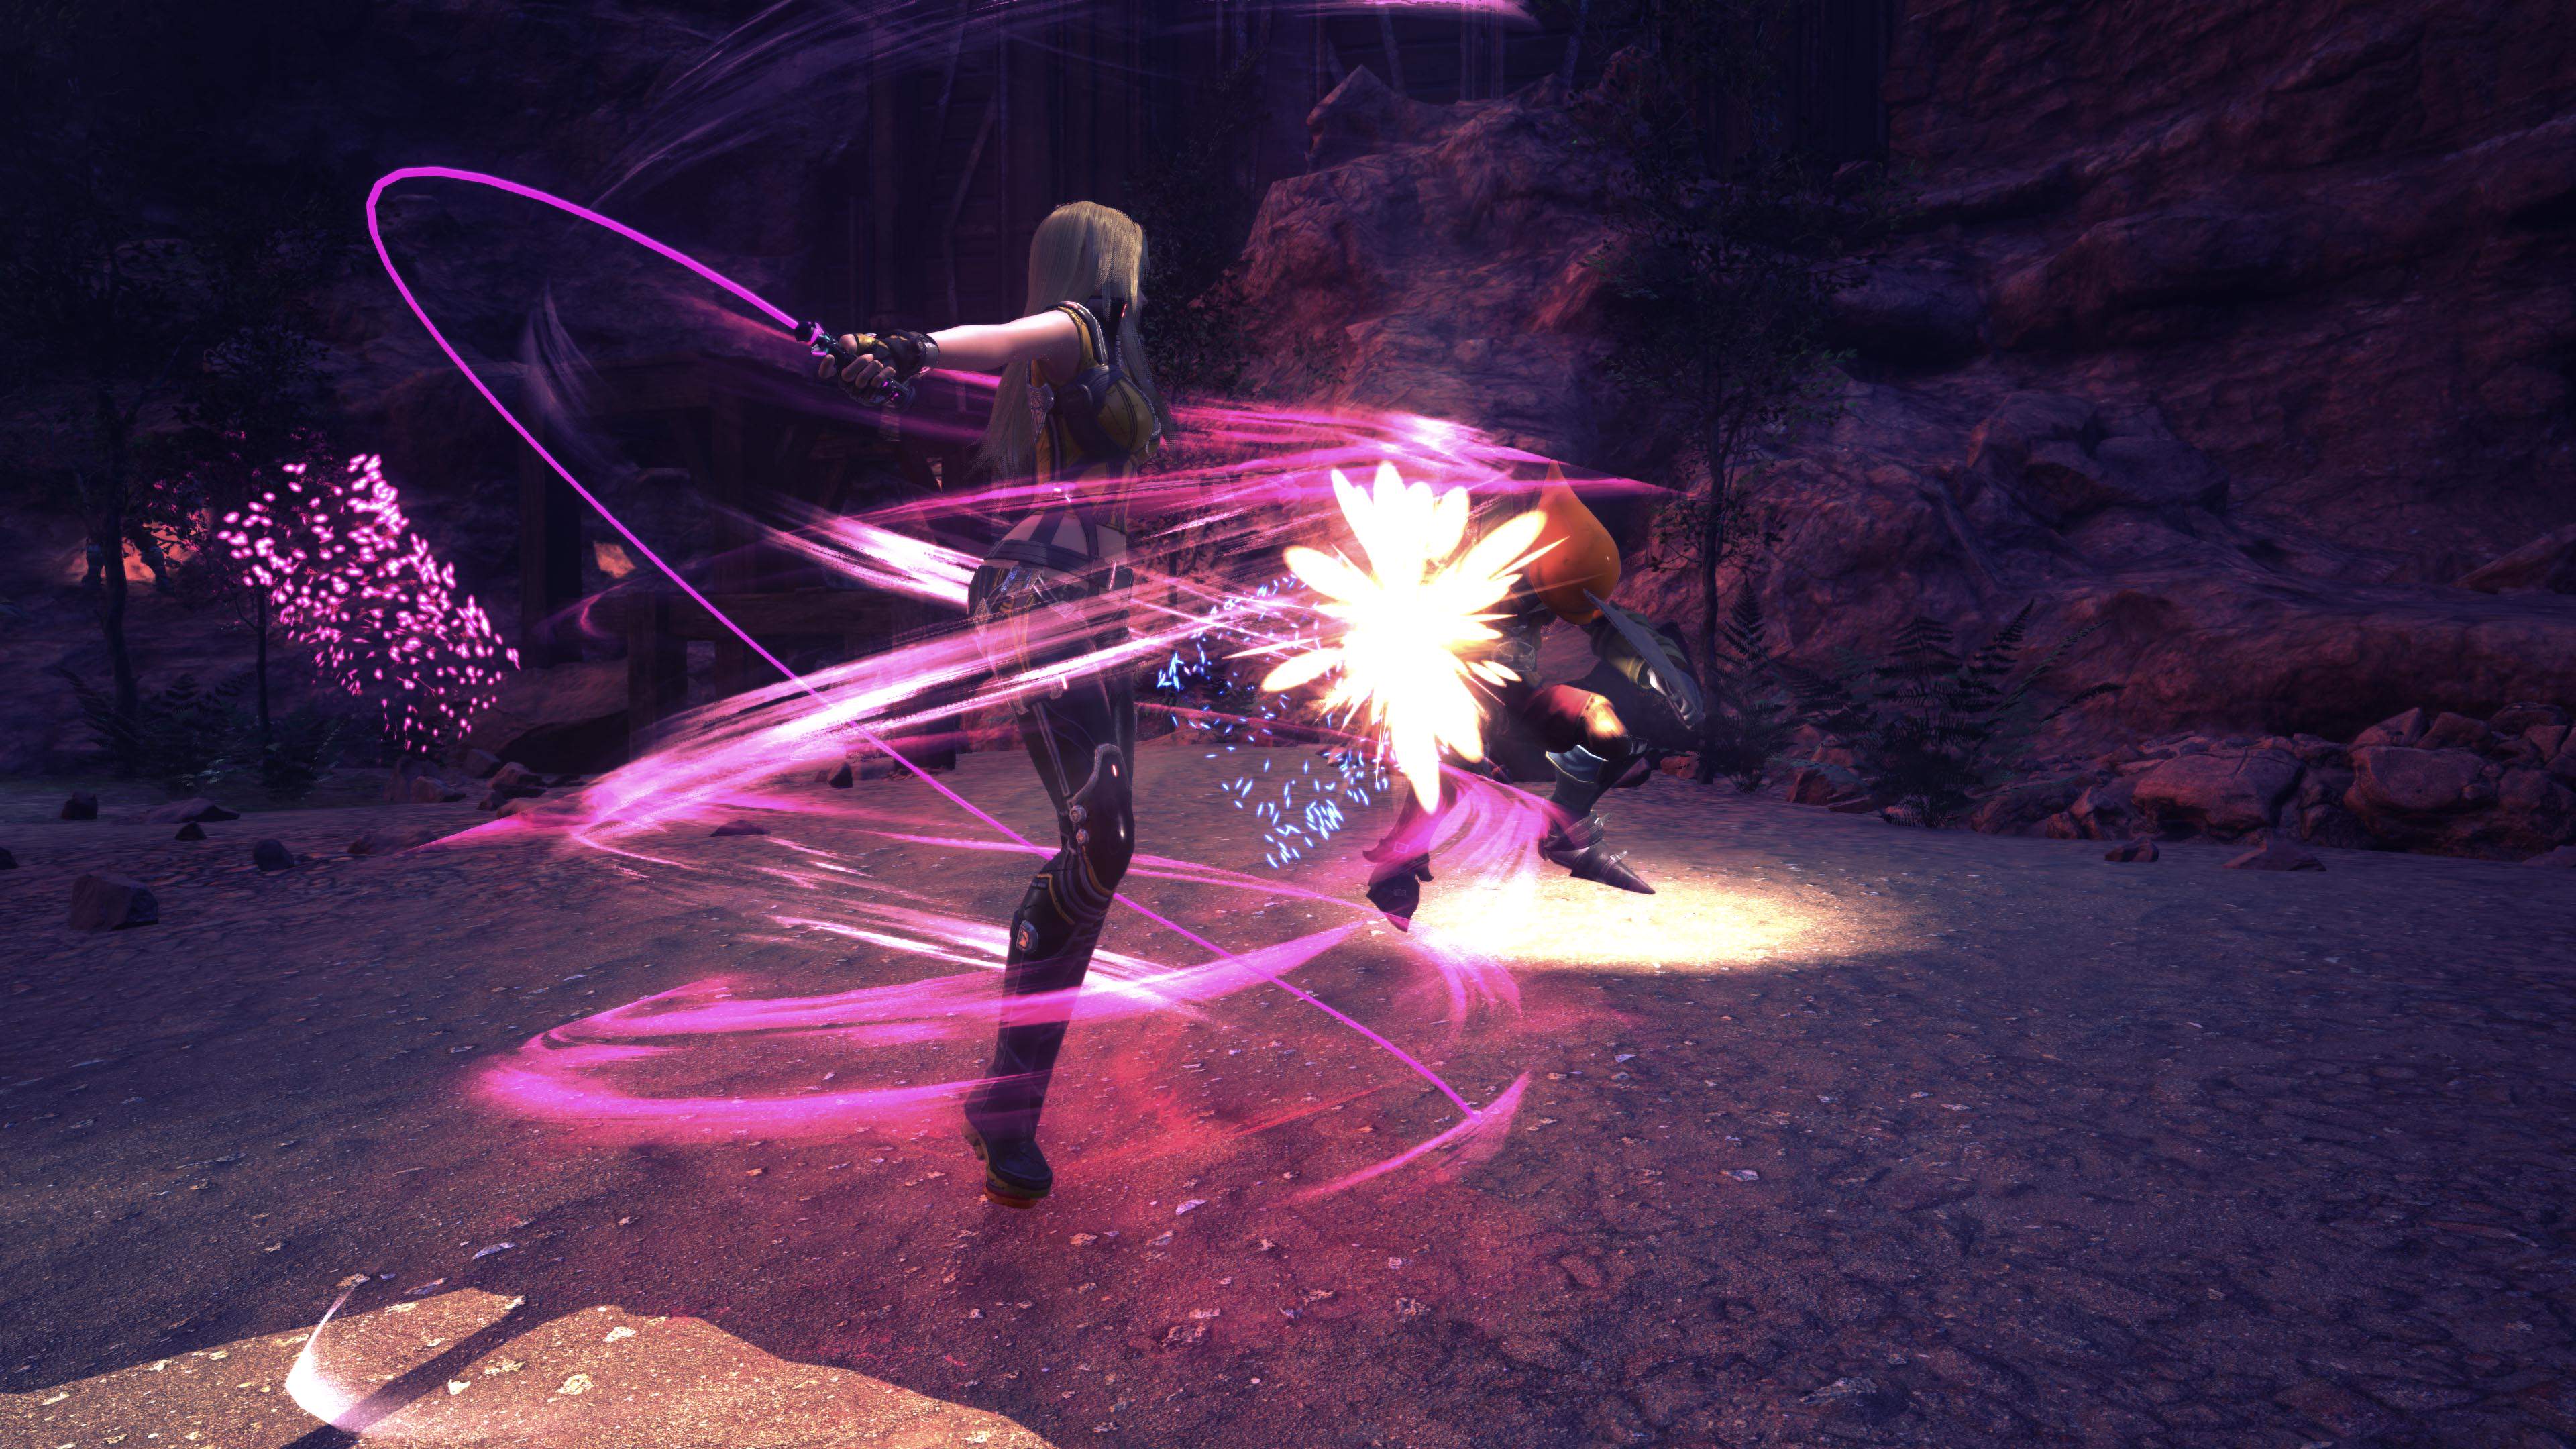 A blonde woman, Elena, fights with a magical whip against an enemy